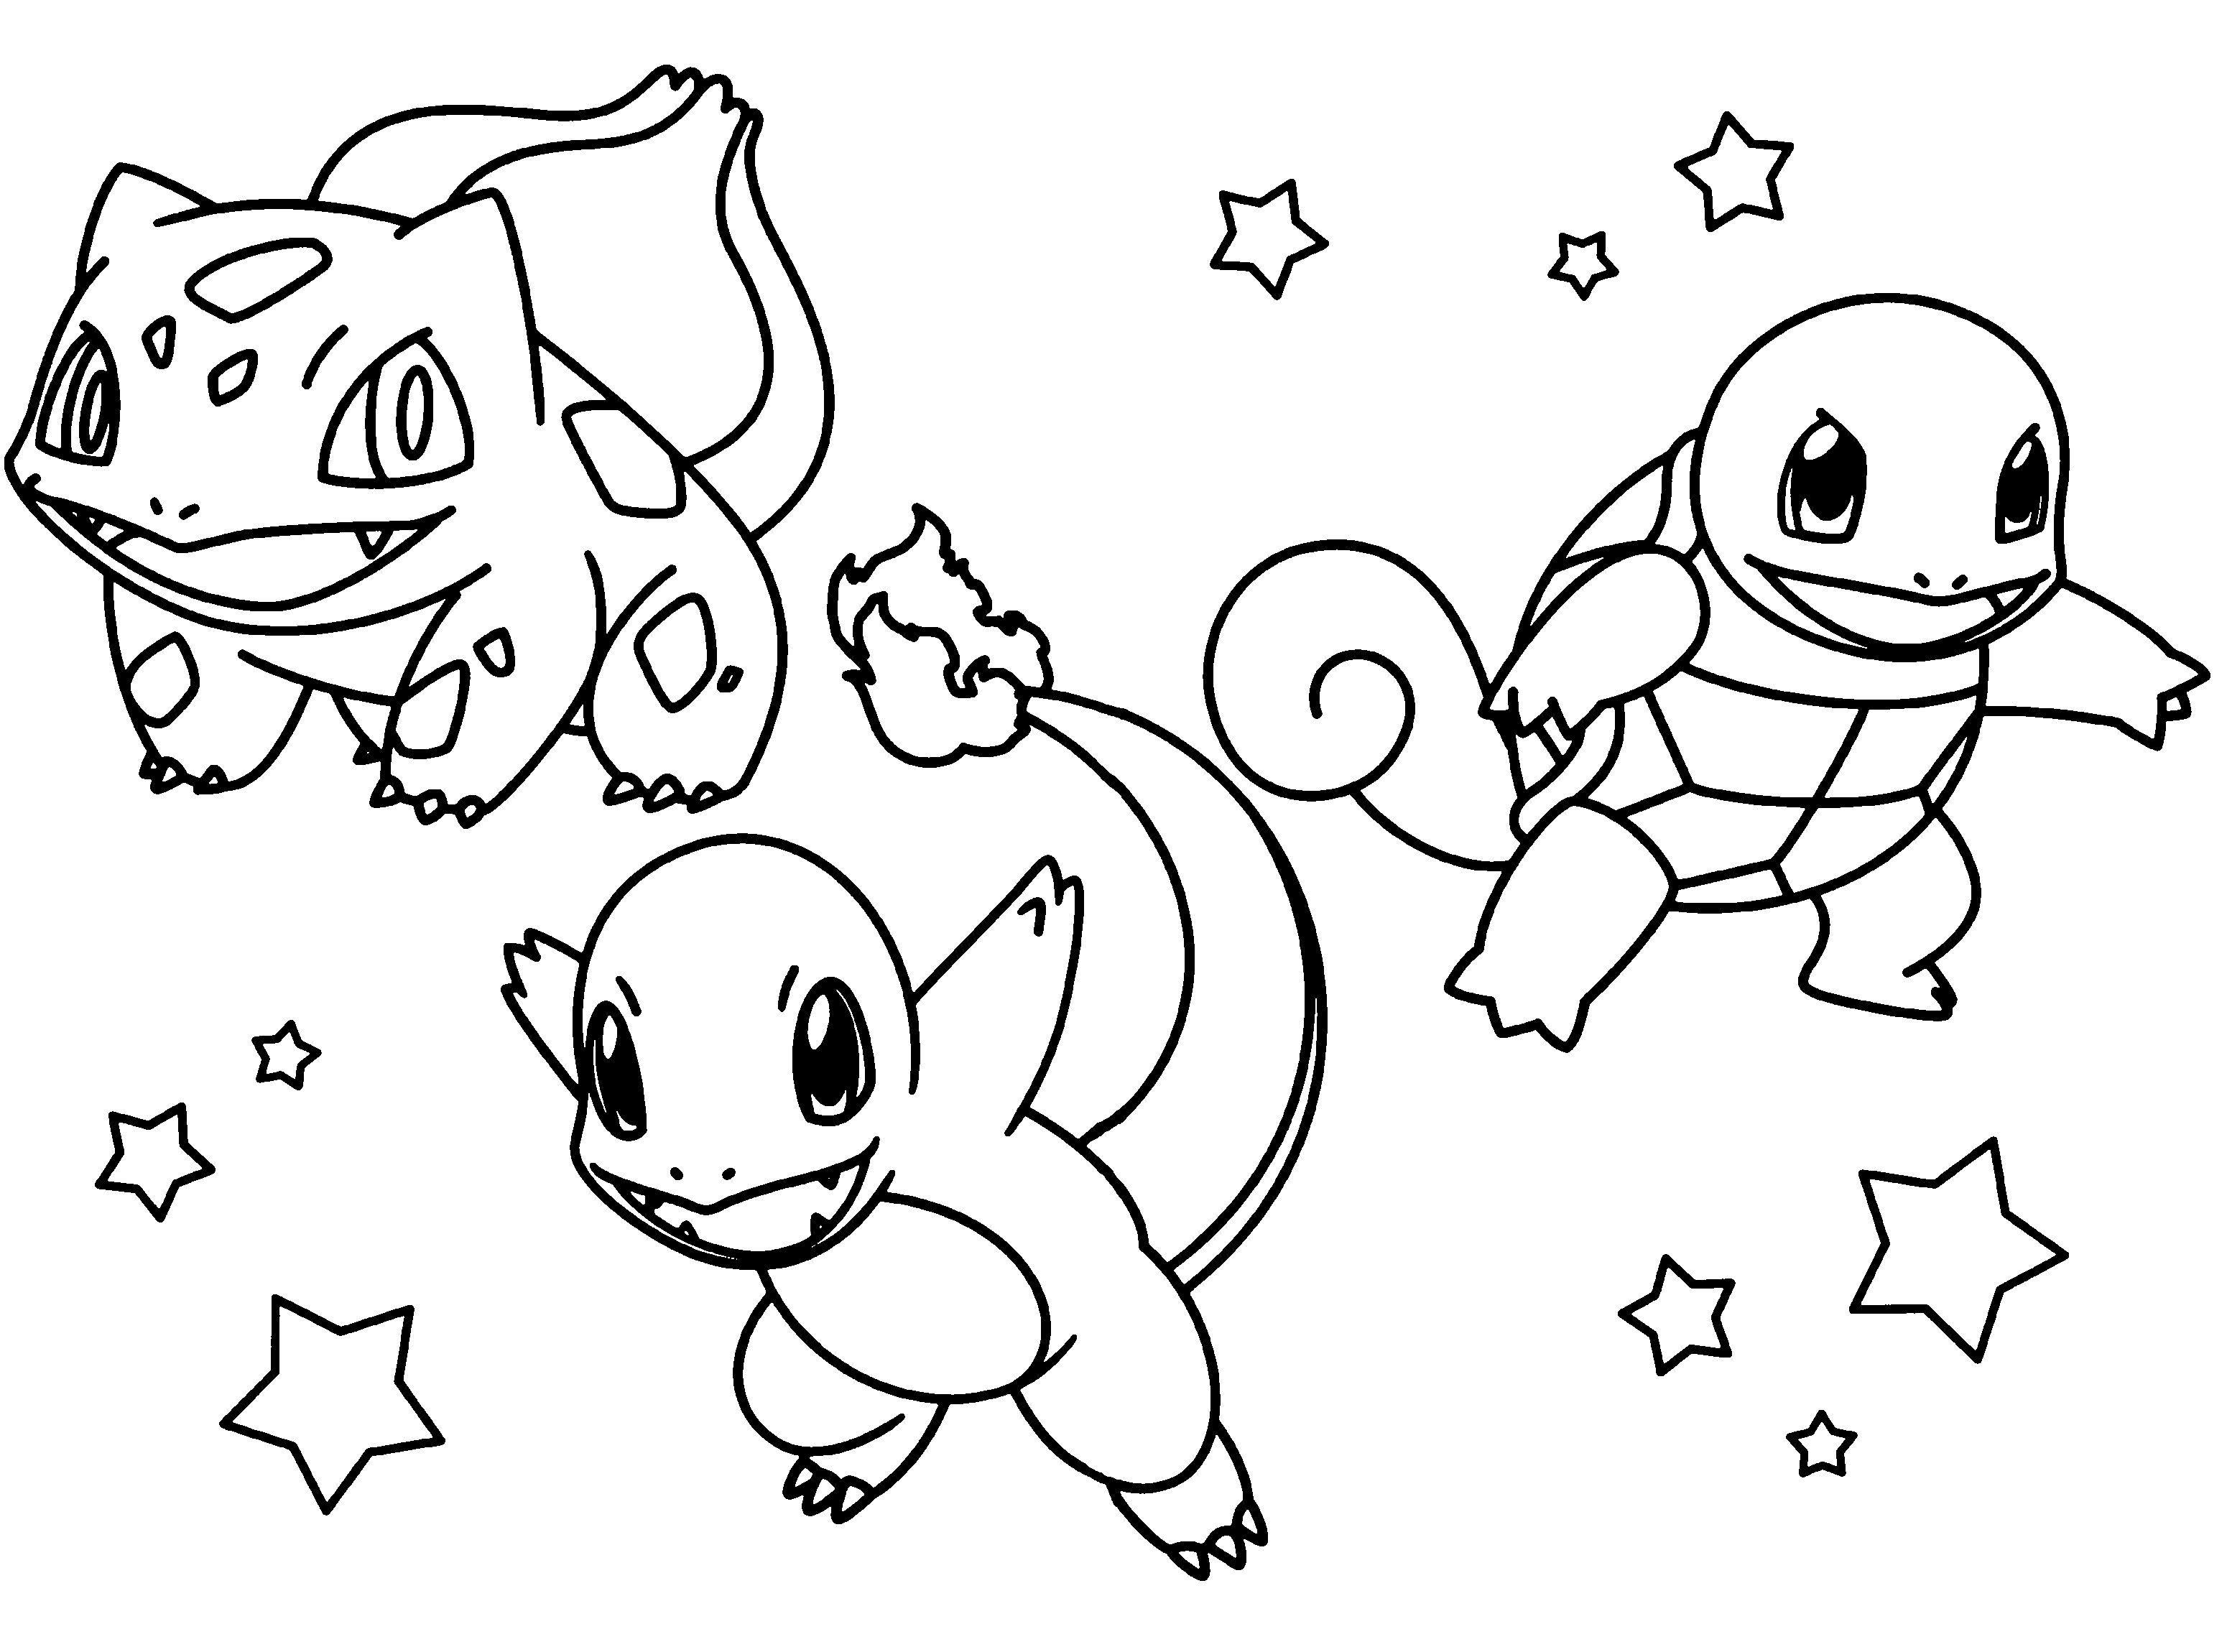 Squirtle Charmander And Pikachu Coloring Pages Sketch Coloring Page Coloring Home Because pokemon coloring pages brings you some great pokemon coloring sheets to print and. squirtle charmander and pikachu